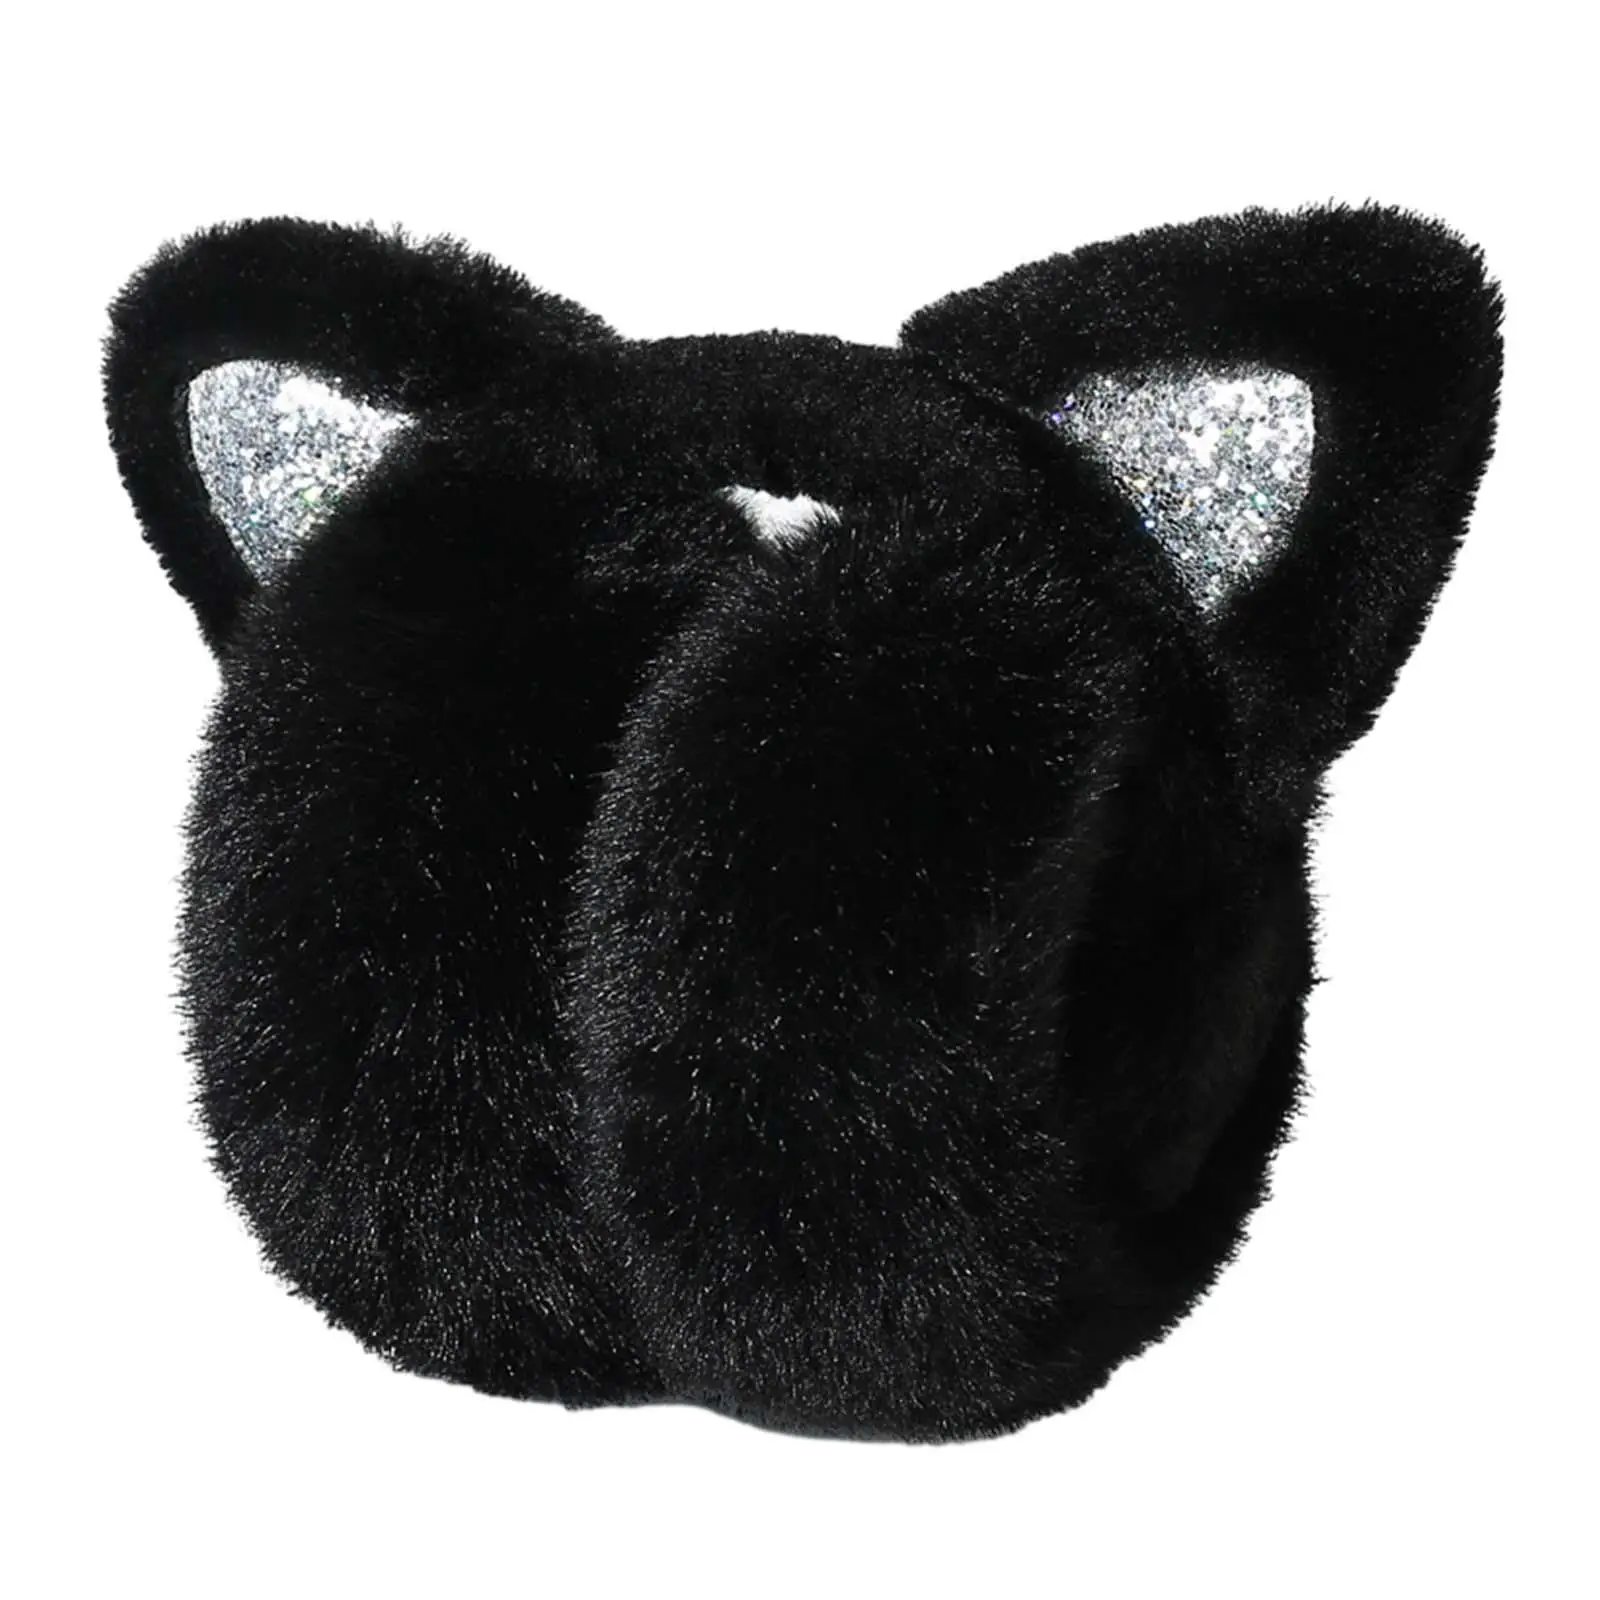 Ear Warmers Premium Folded Women Comfortable Winter Ear Muffs Earmuffs Ear Cover for Skating Cycling Cold Weather Outdoor Skiing